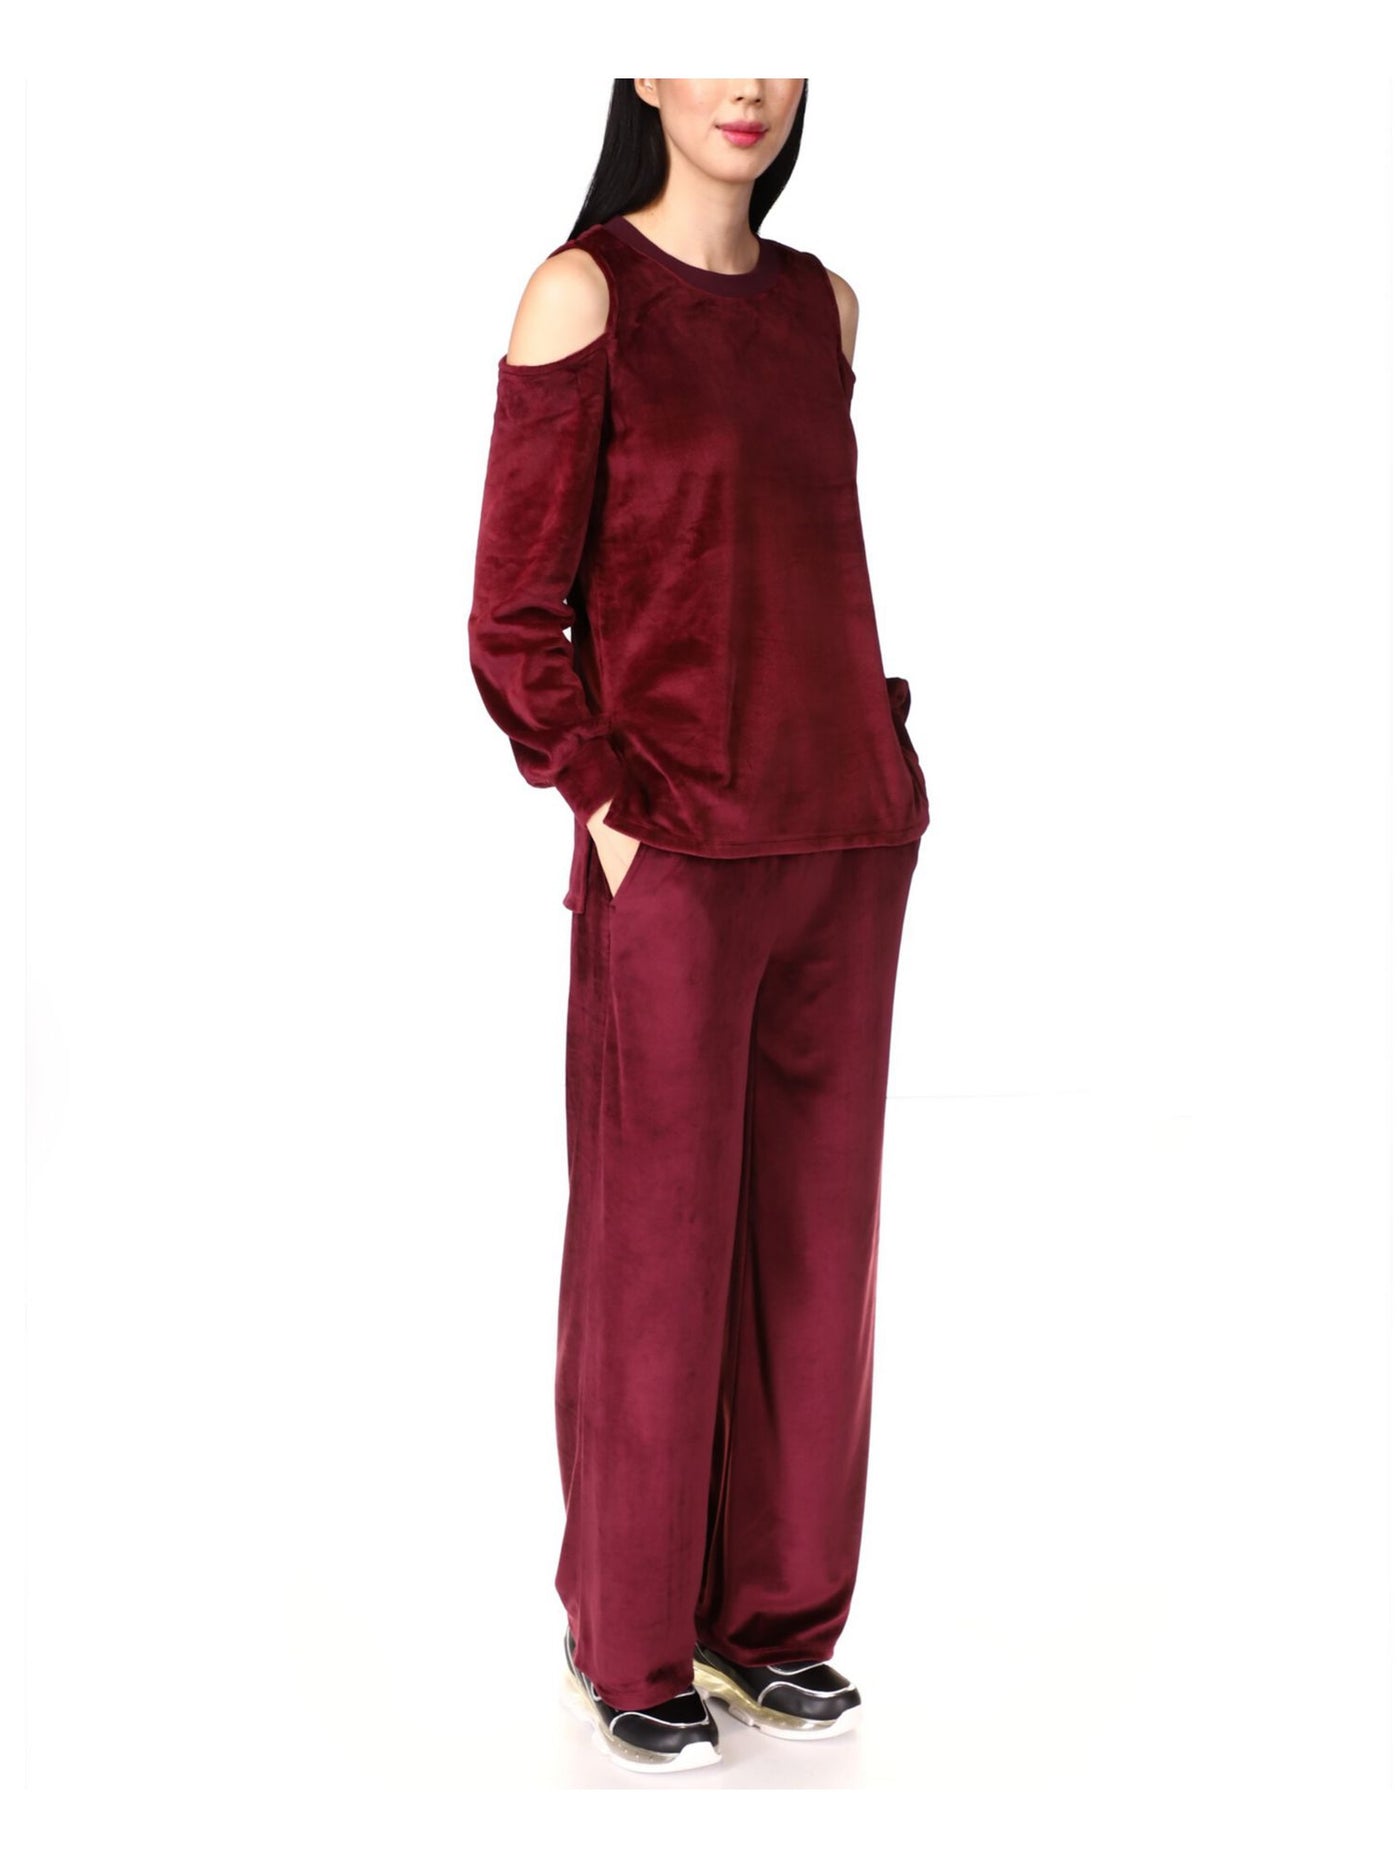 MICHAEL MICHAEL KORS Womens Maroon Cold Shoulder Slitted Velour Long Sleeve Crew Neck Top XS